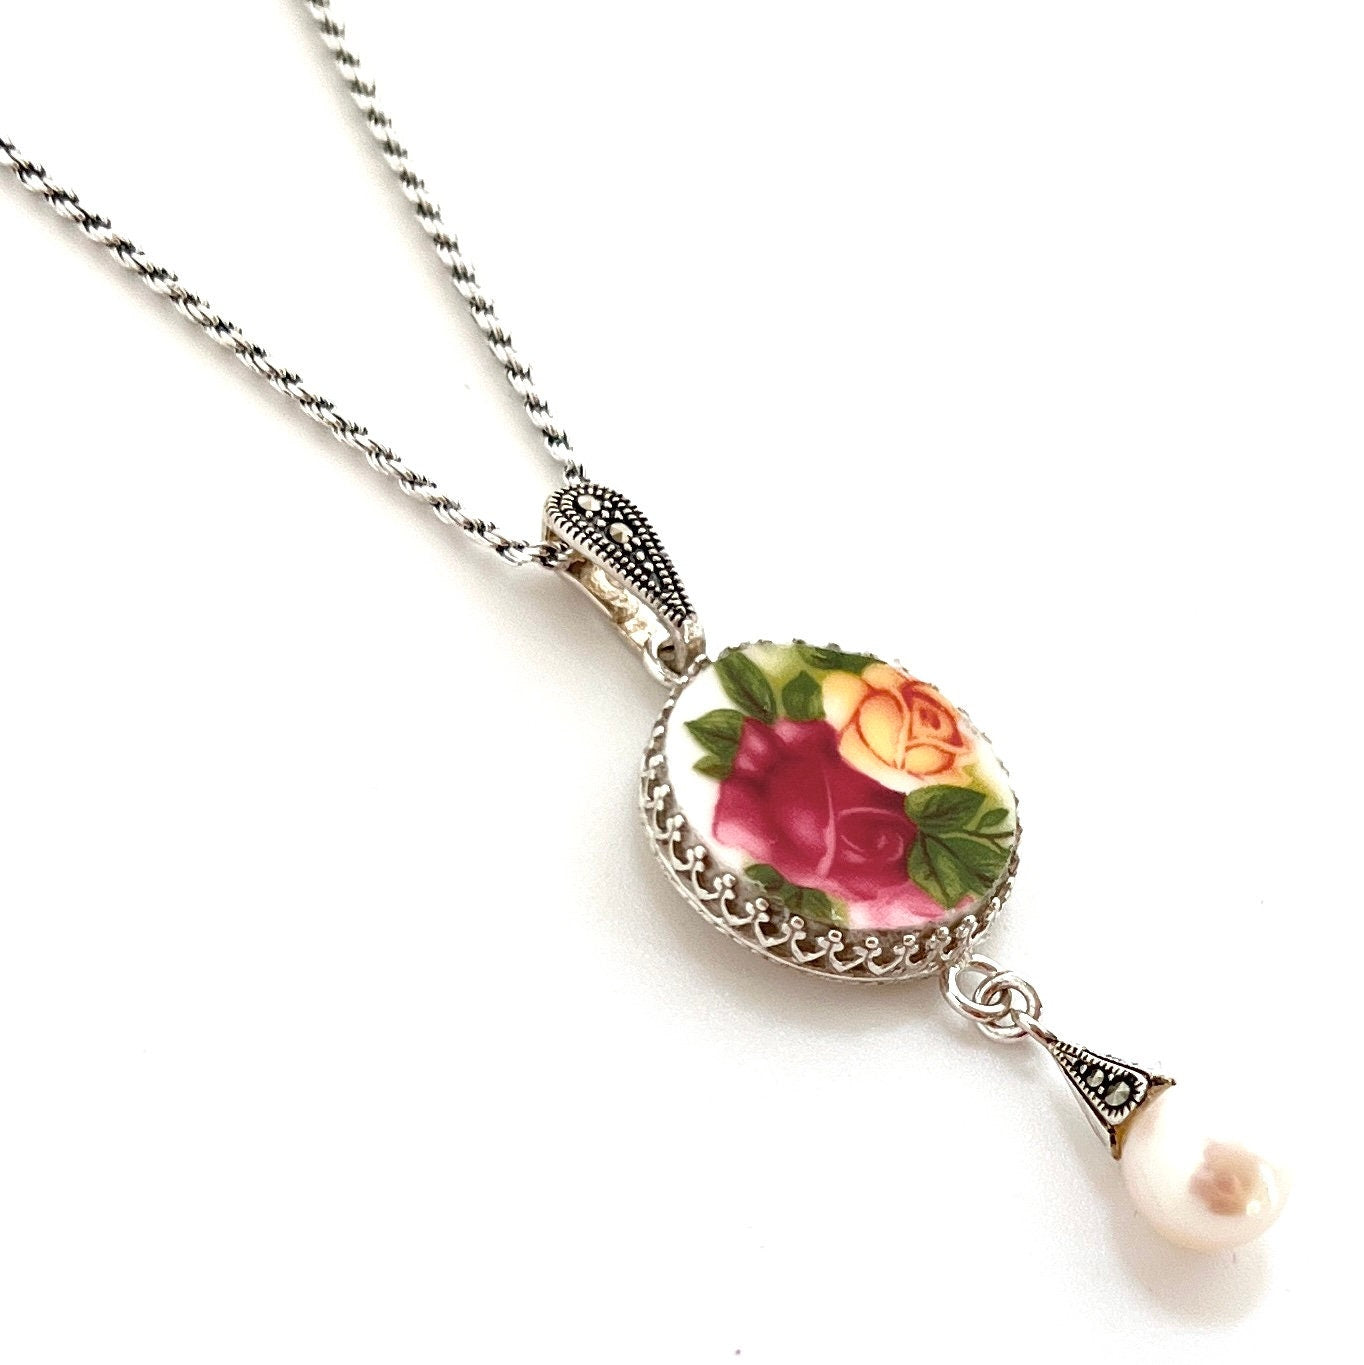 Sterling Silver Marcasite and Pearl Necklace, Old Country Roses 20th Anniversary Gift for Wife, Broken China Jewelry, Gifts for Her